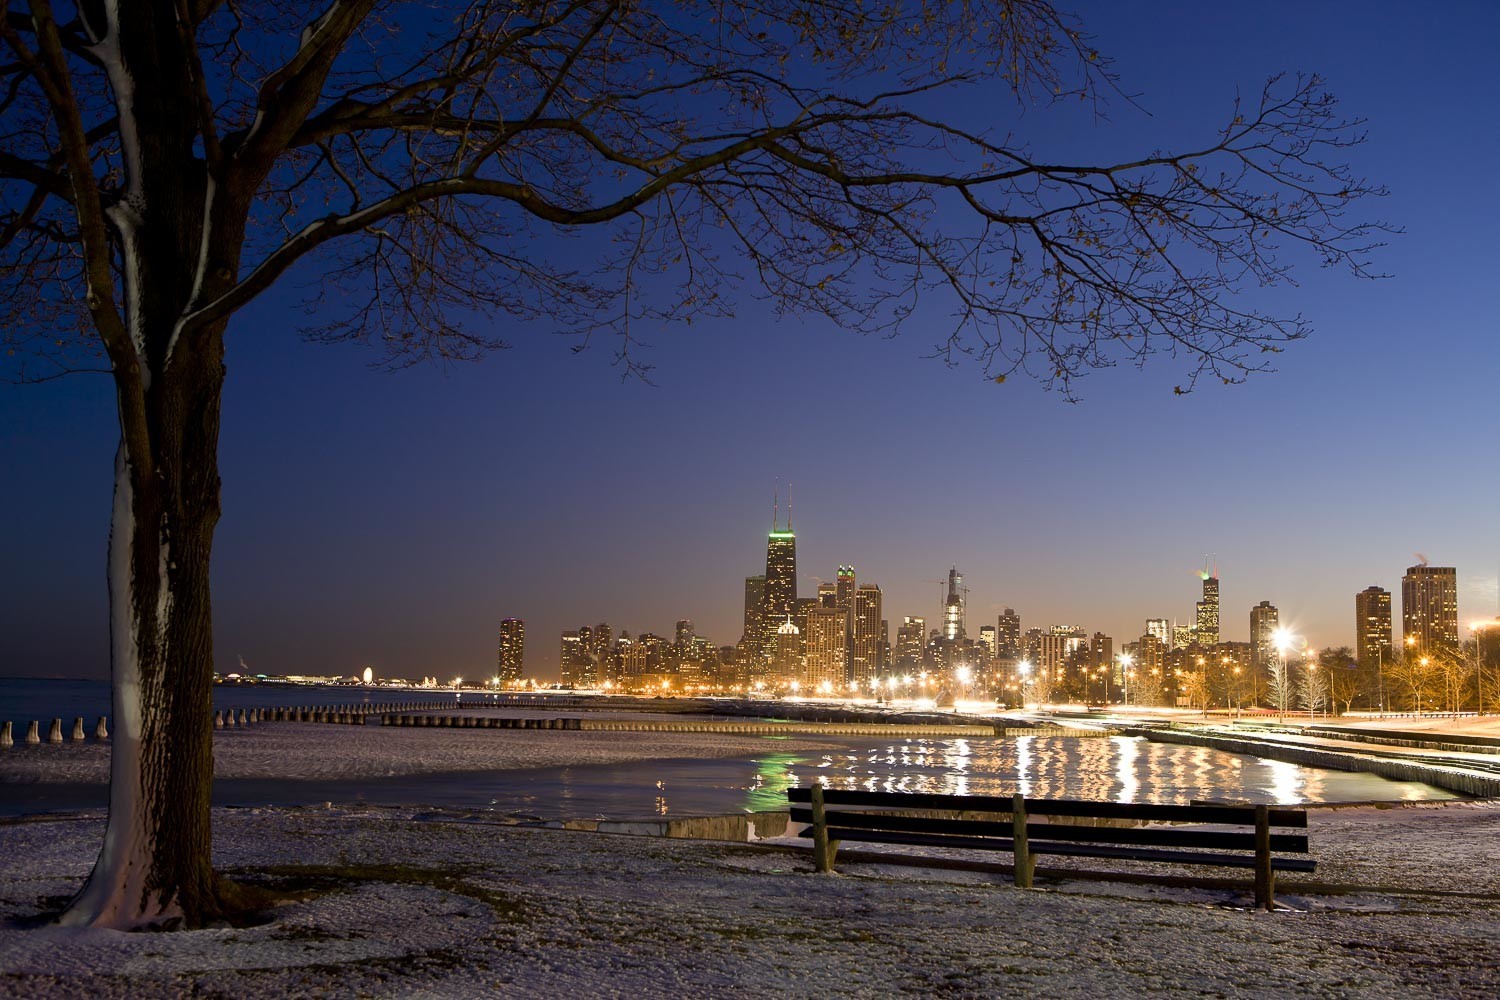 A cold crisp night in December in Chicago. Looking South from Fullerton Beach